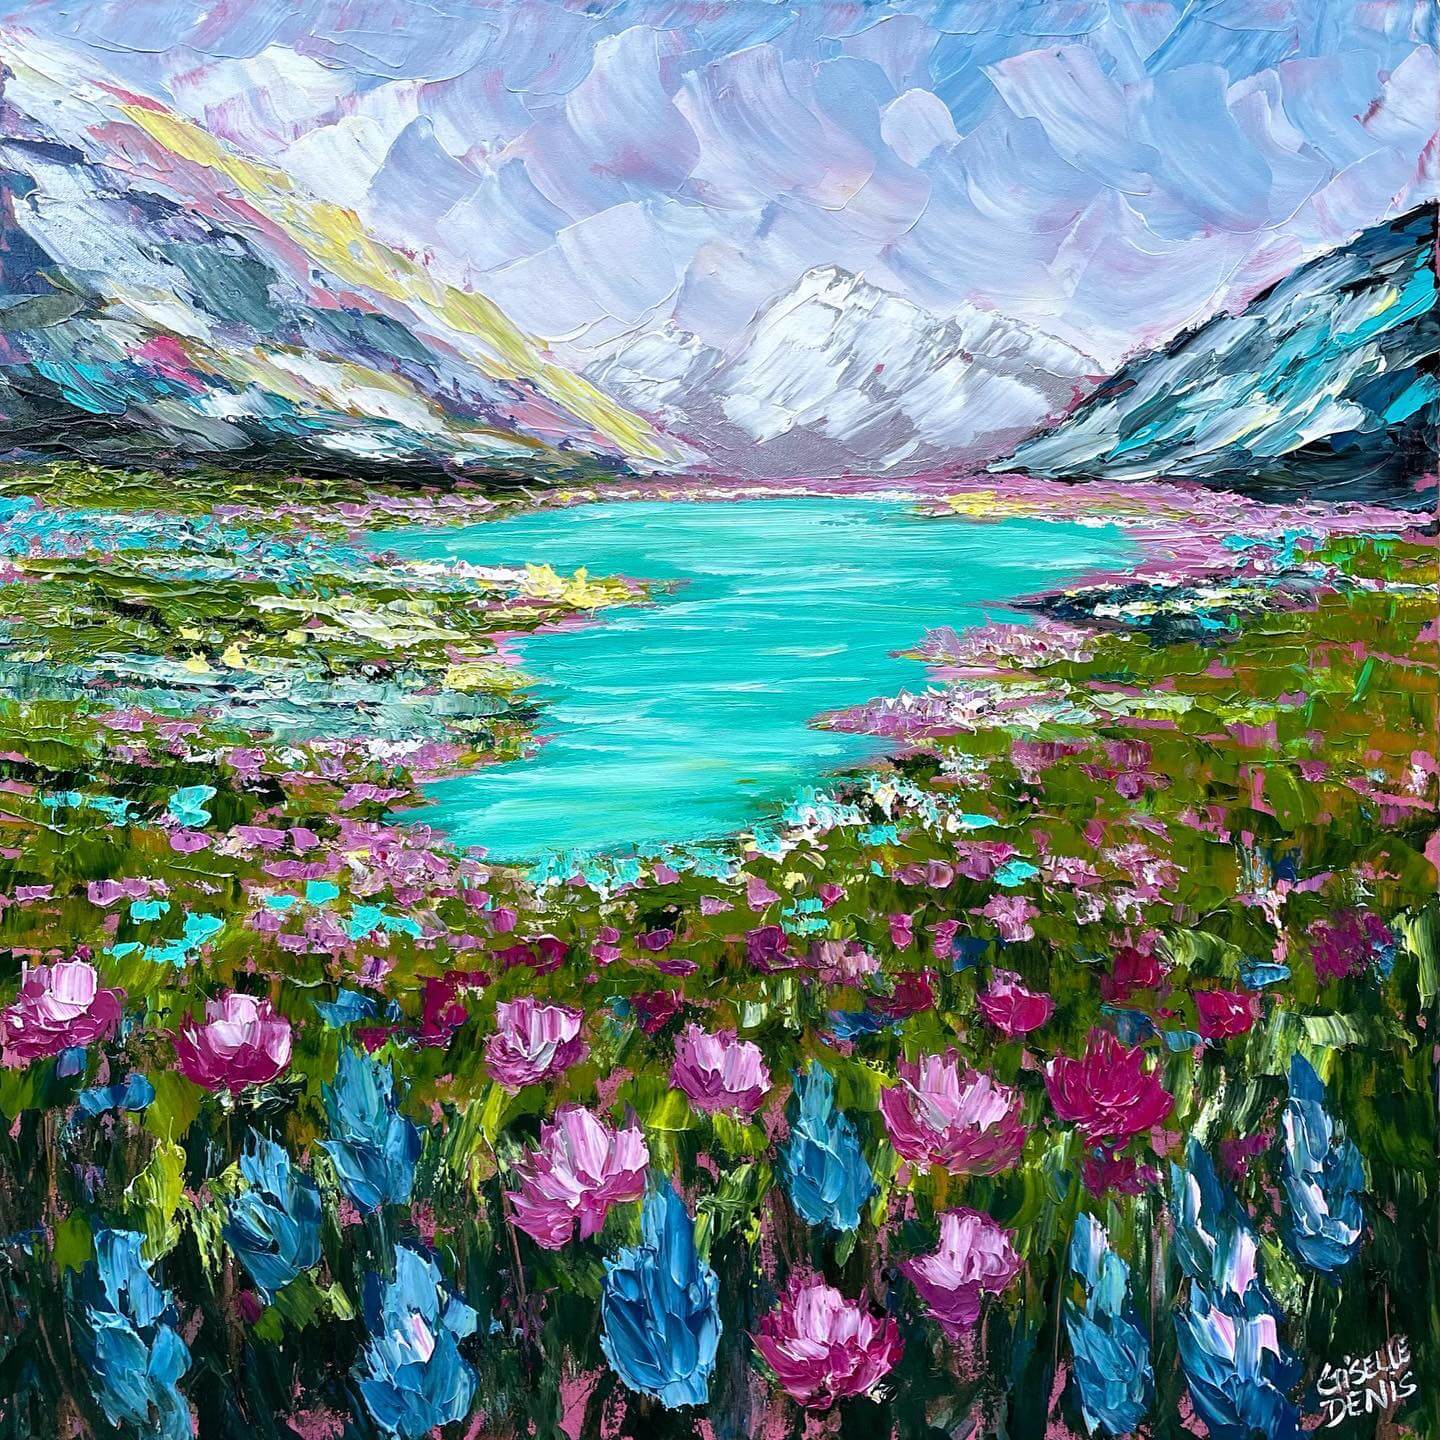 Painting of a mountain landscape by Giselle Denis, featuring mountains with snow on their peaks, a lake, and colorful flowers in the foreground.